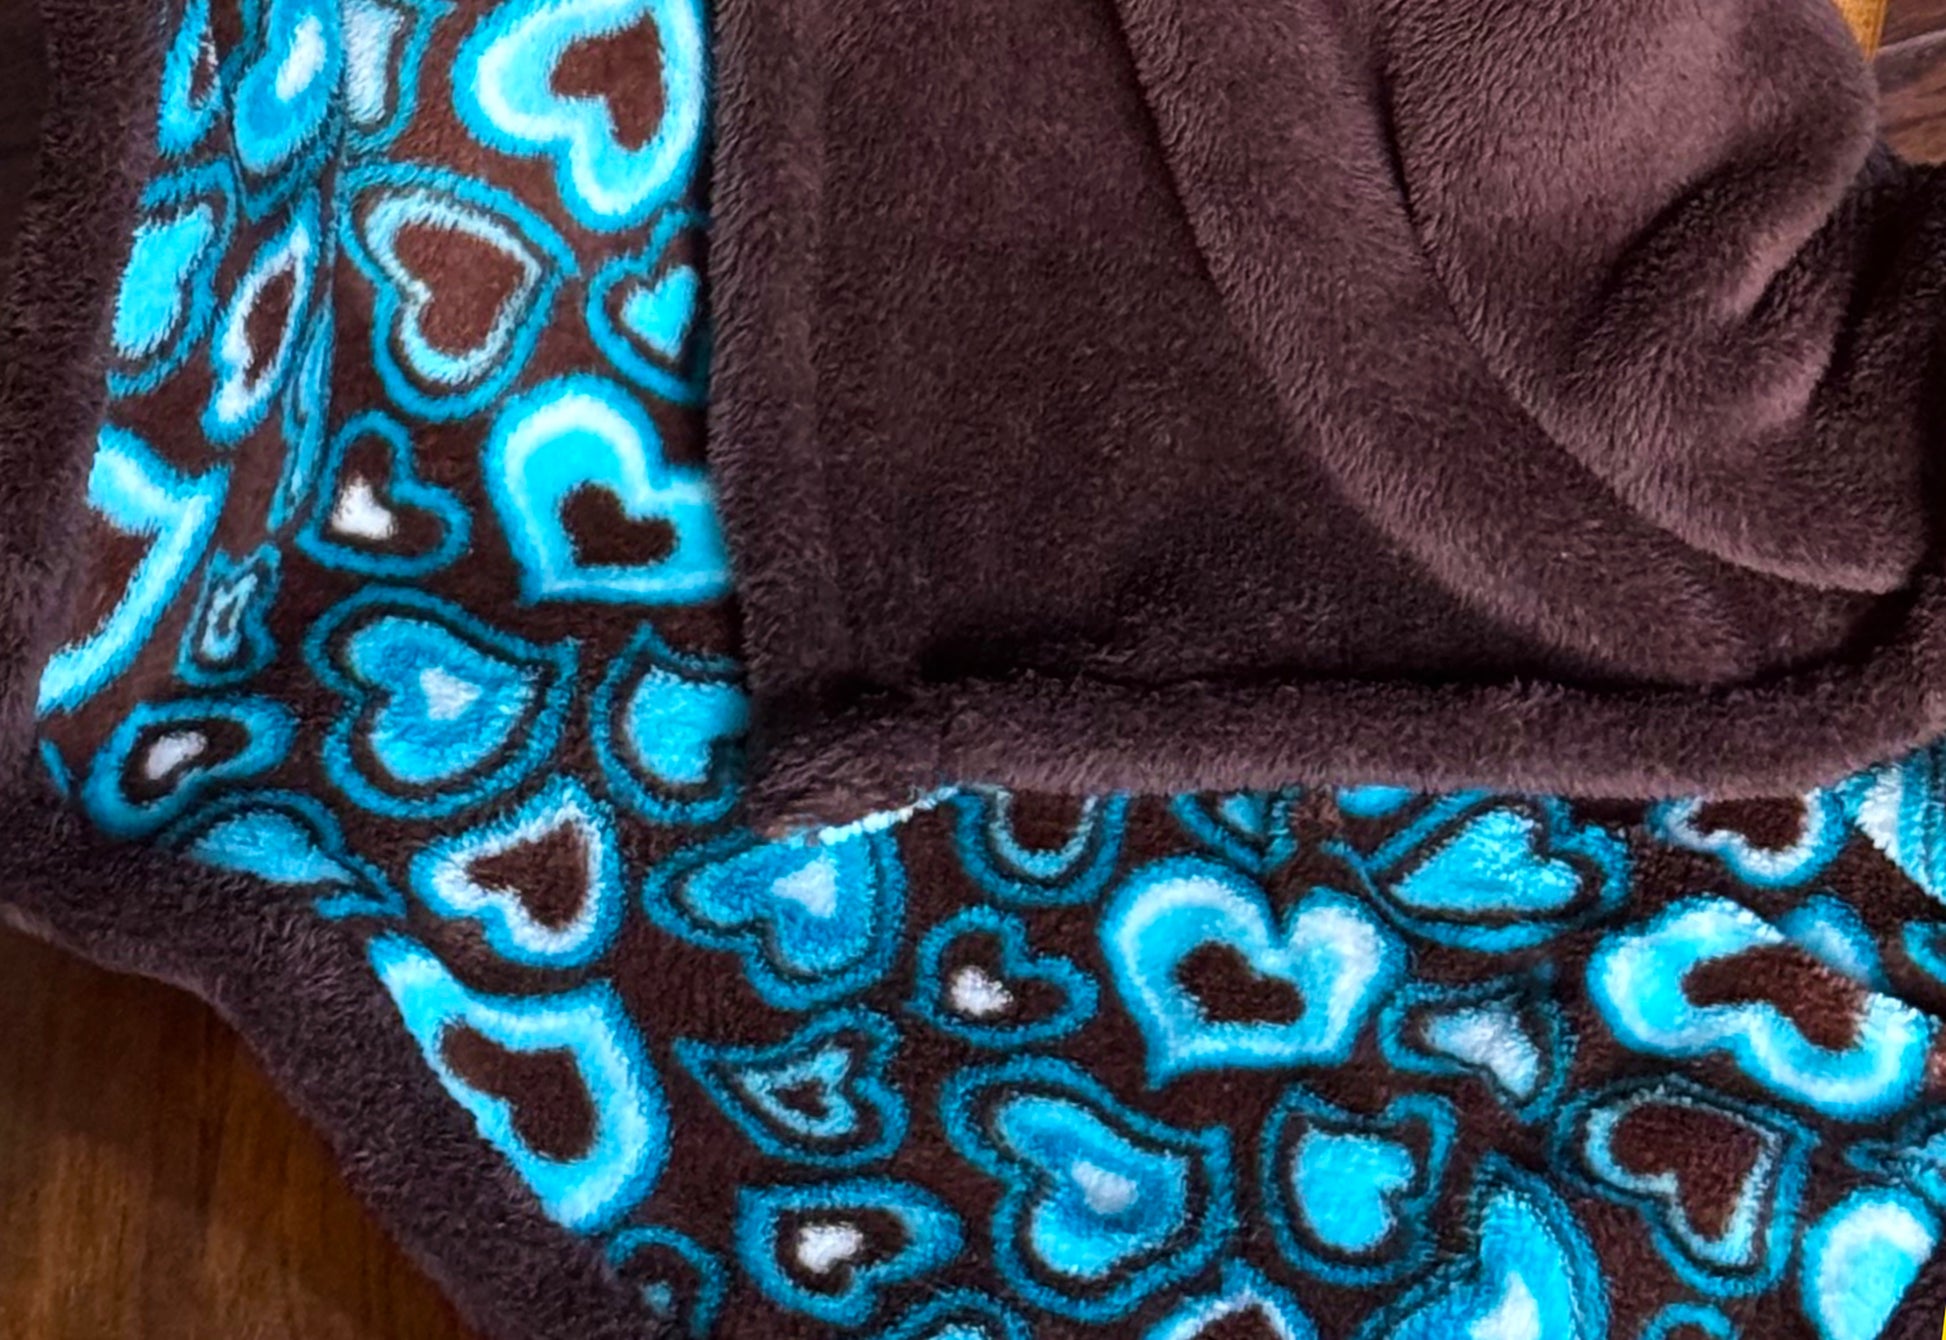 The cuddliest blanket with a pattern of hearts in different sizes and colors of light & medium blue, brown, and white on one side, and solid brown on the opposite side.  Made with up-cycled polyester fabric.  Perfect for those chilly nights with a hot cup of cocoa.  Dimensions: 46" x 36" Machine wash cold, air dry. Made with Love in the USA